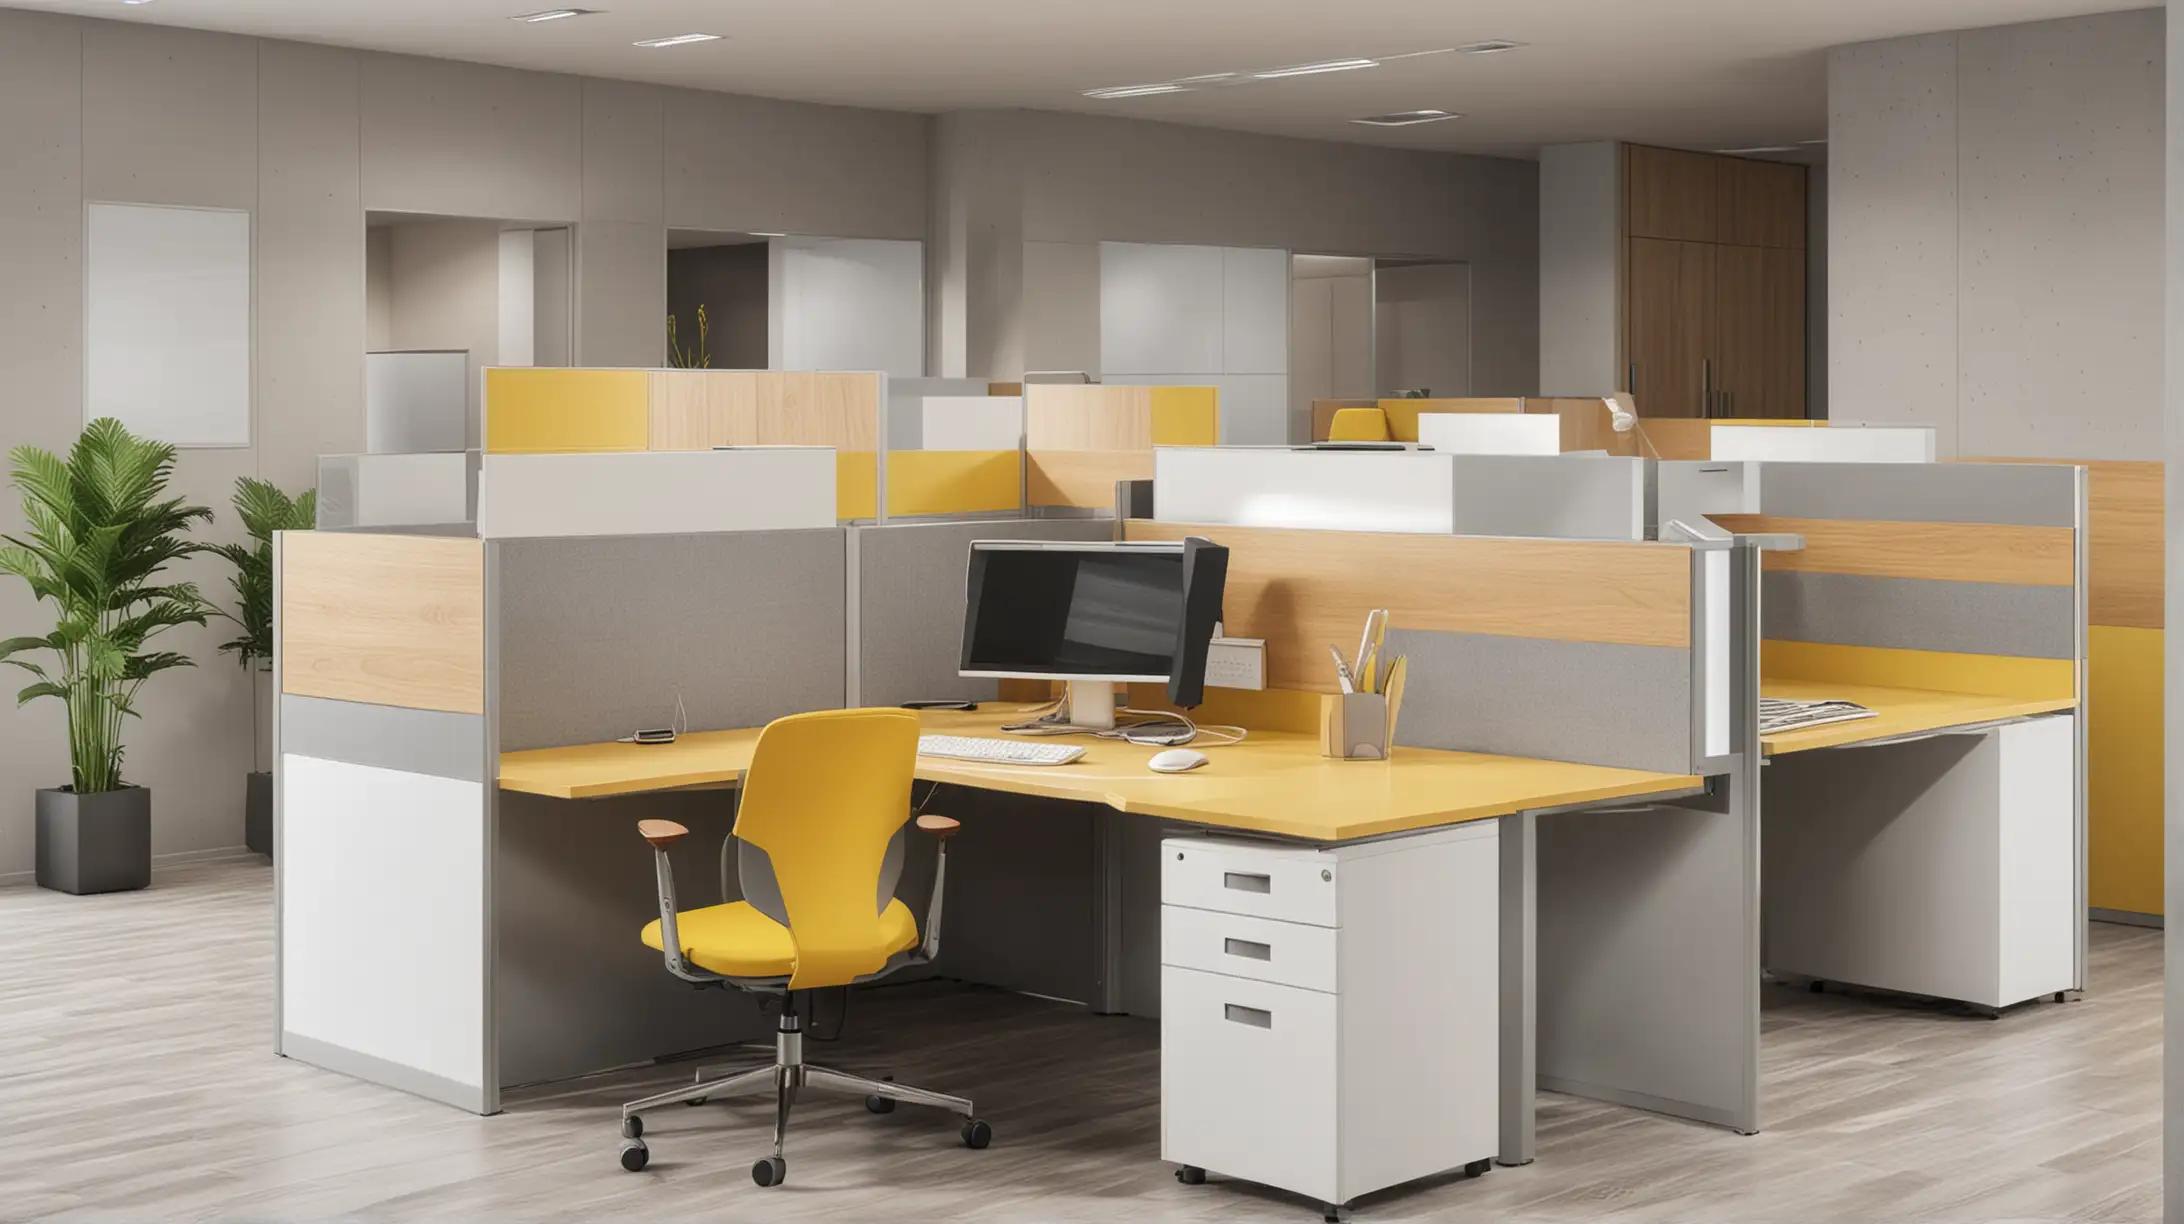 a cubicle for call center with minimalist and digital look, with a computer and a telephone, with some wooden panel and colors of grey and white and a splash of yellow